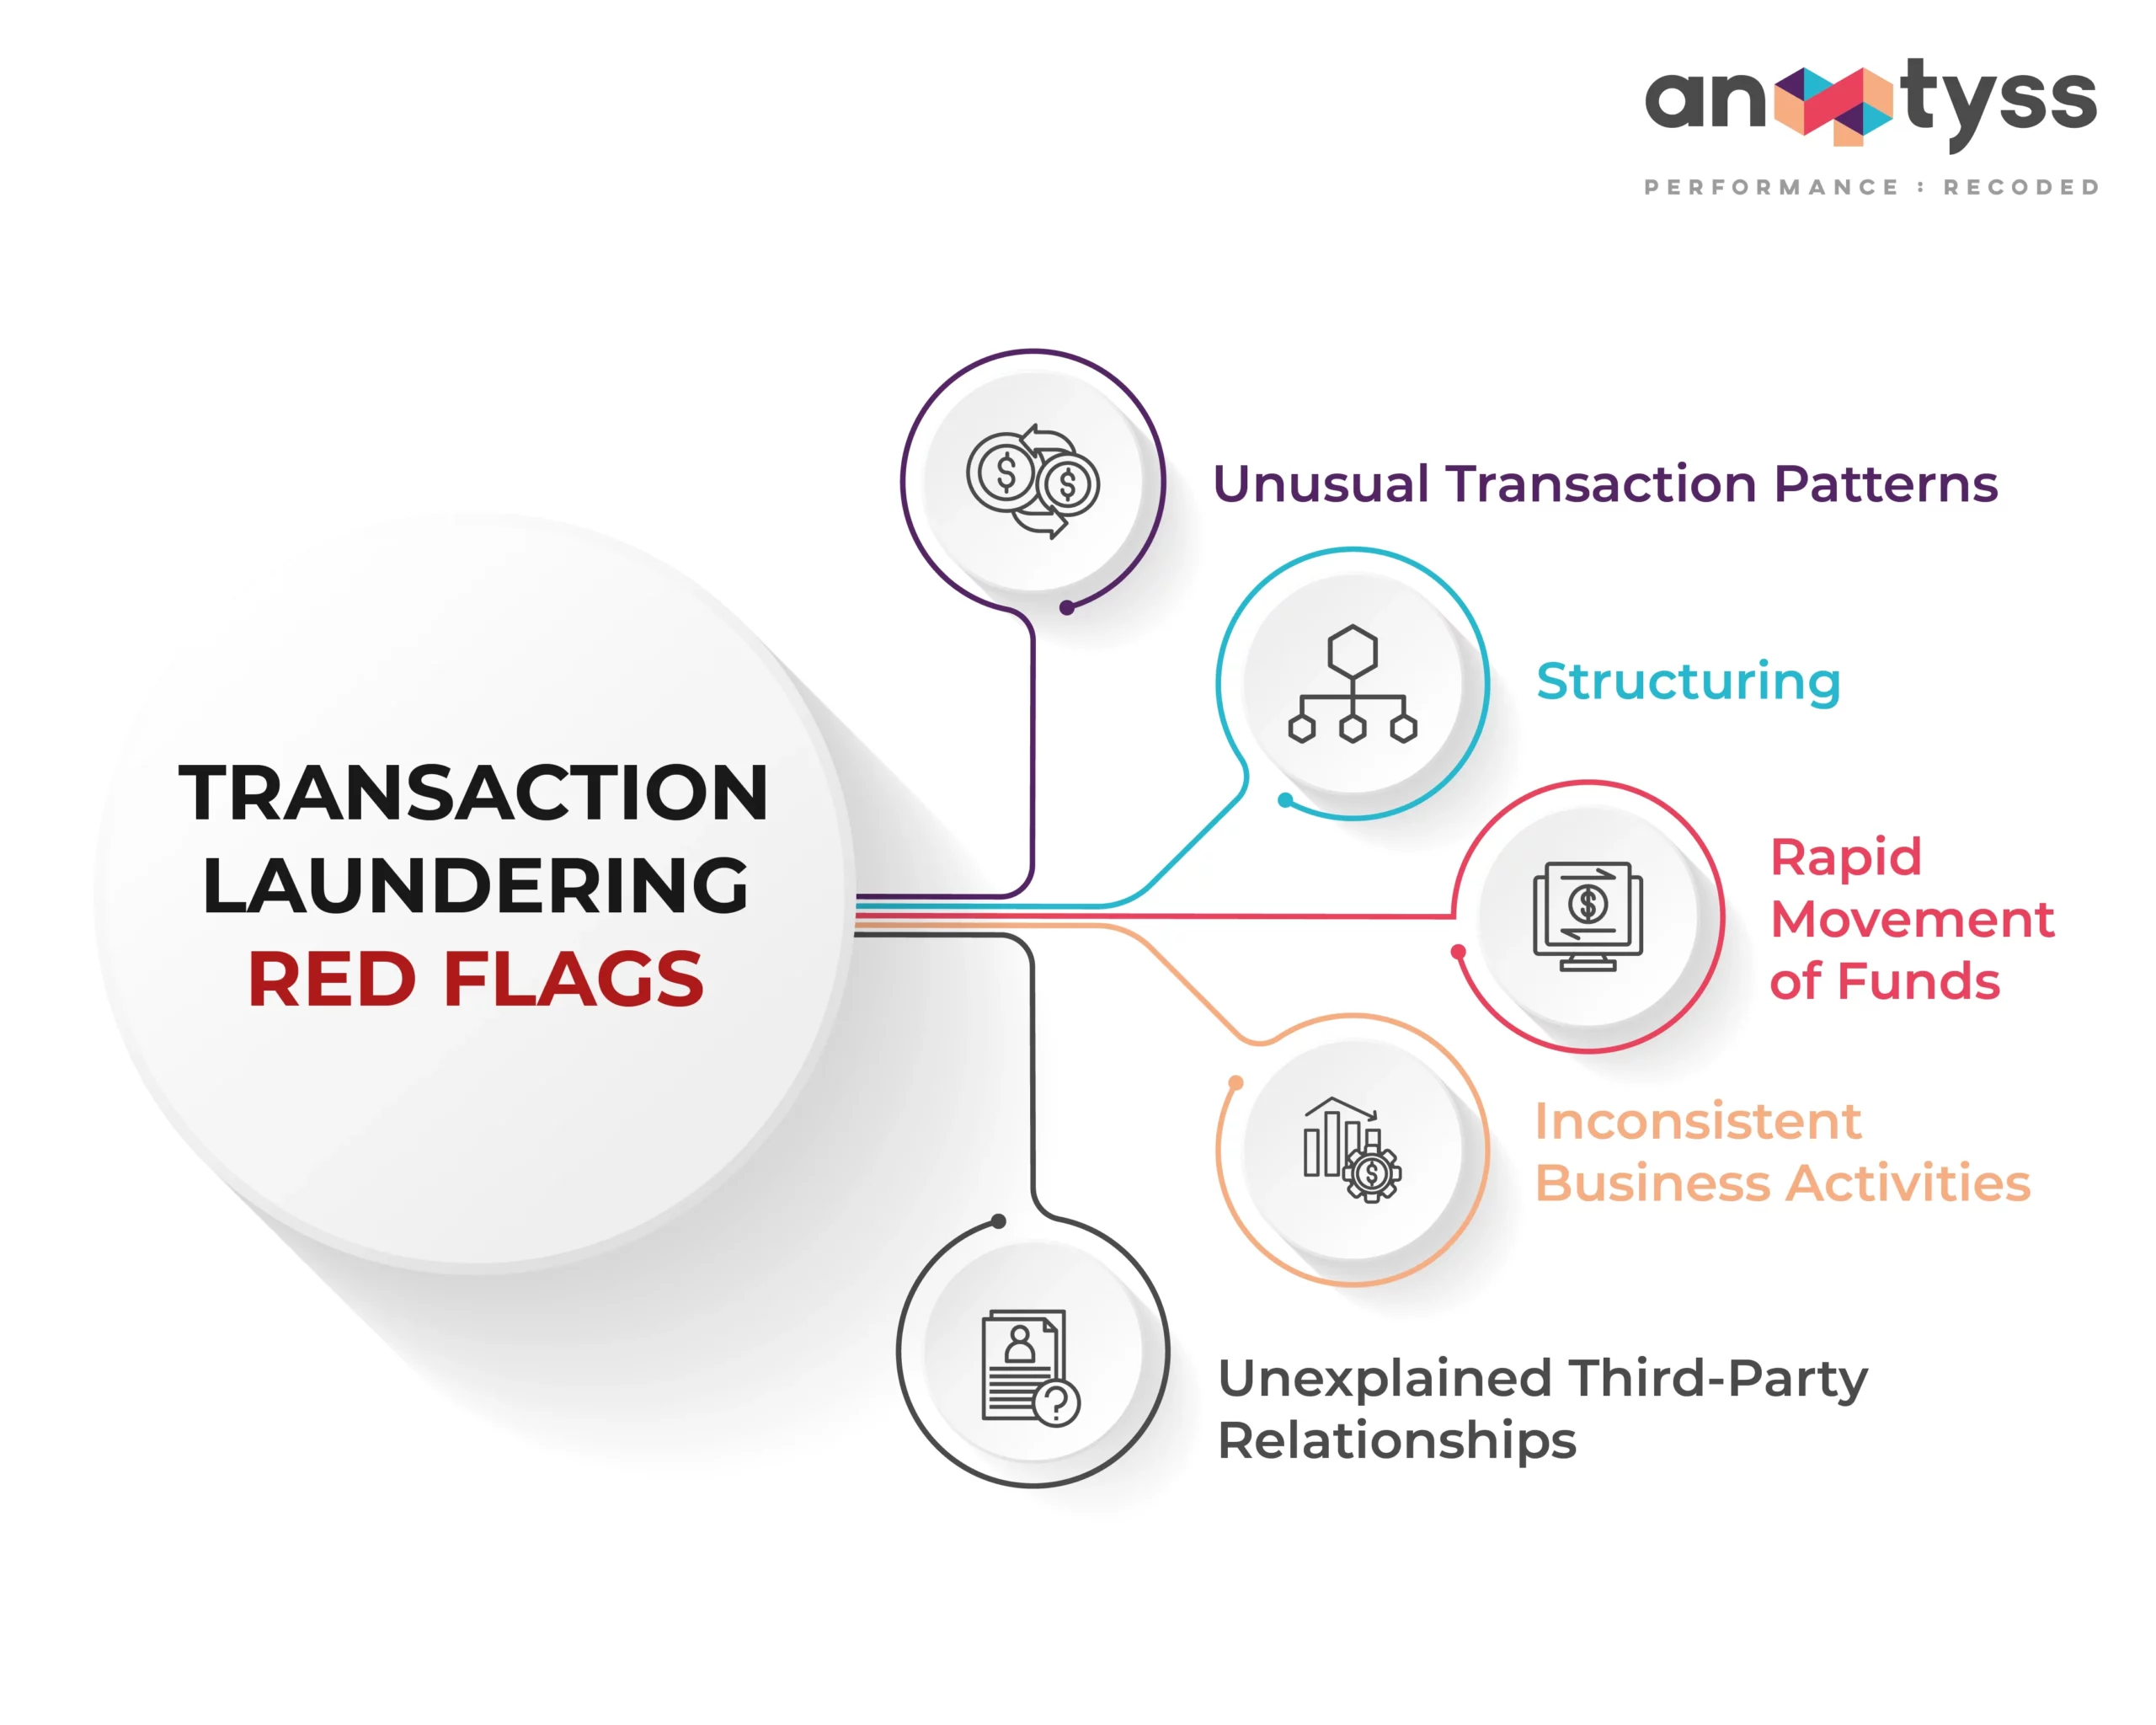 Transaction Laundering Red Flags